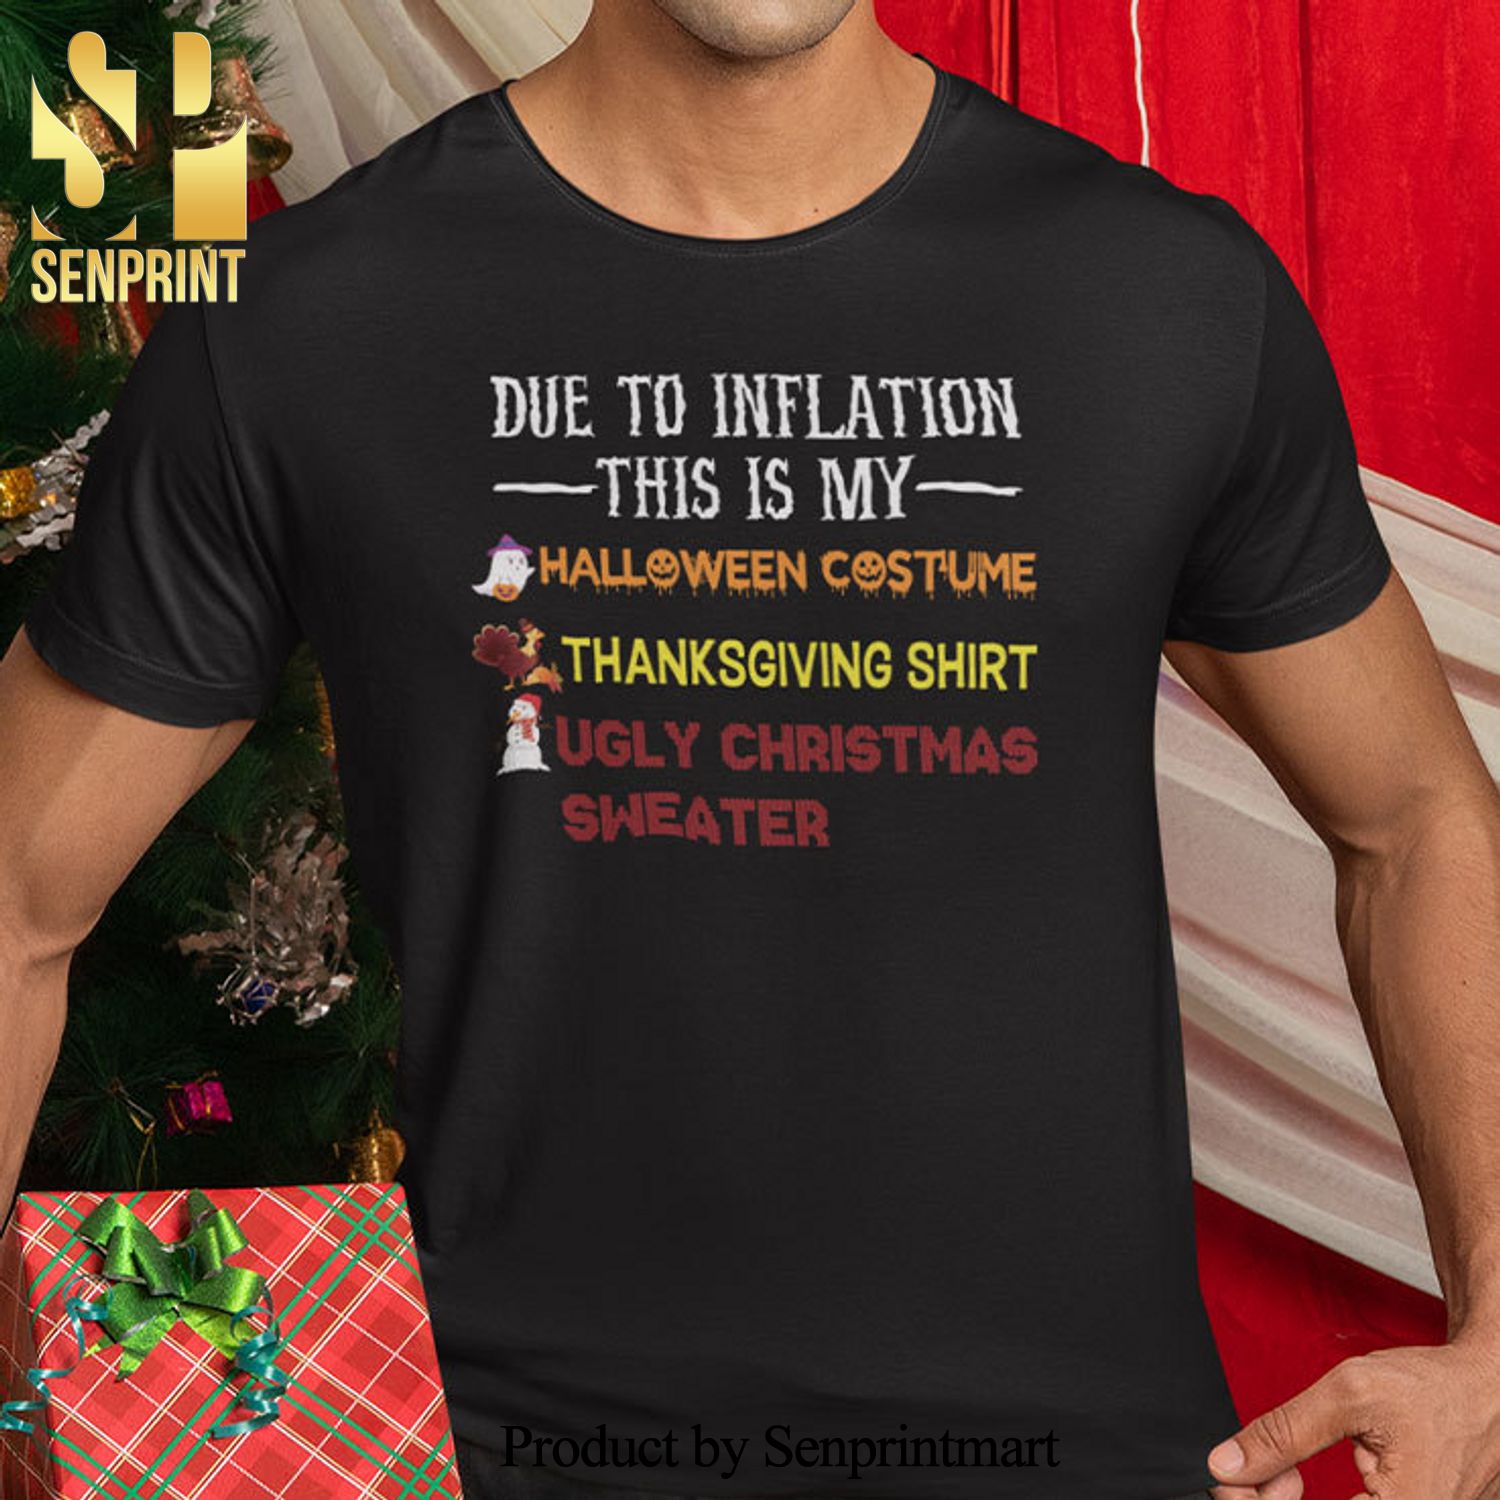 Due to Inflation This is My Halloween Costume Thanksgiving Christmas Gifts Shirt Ugly Christmas Sweater